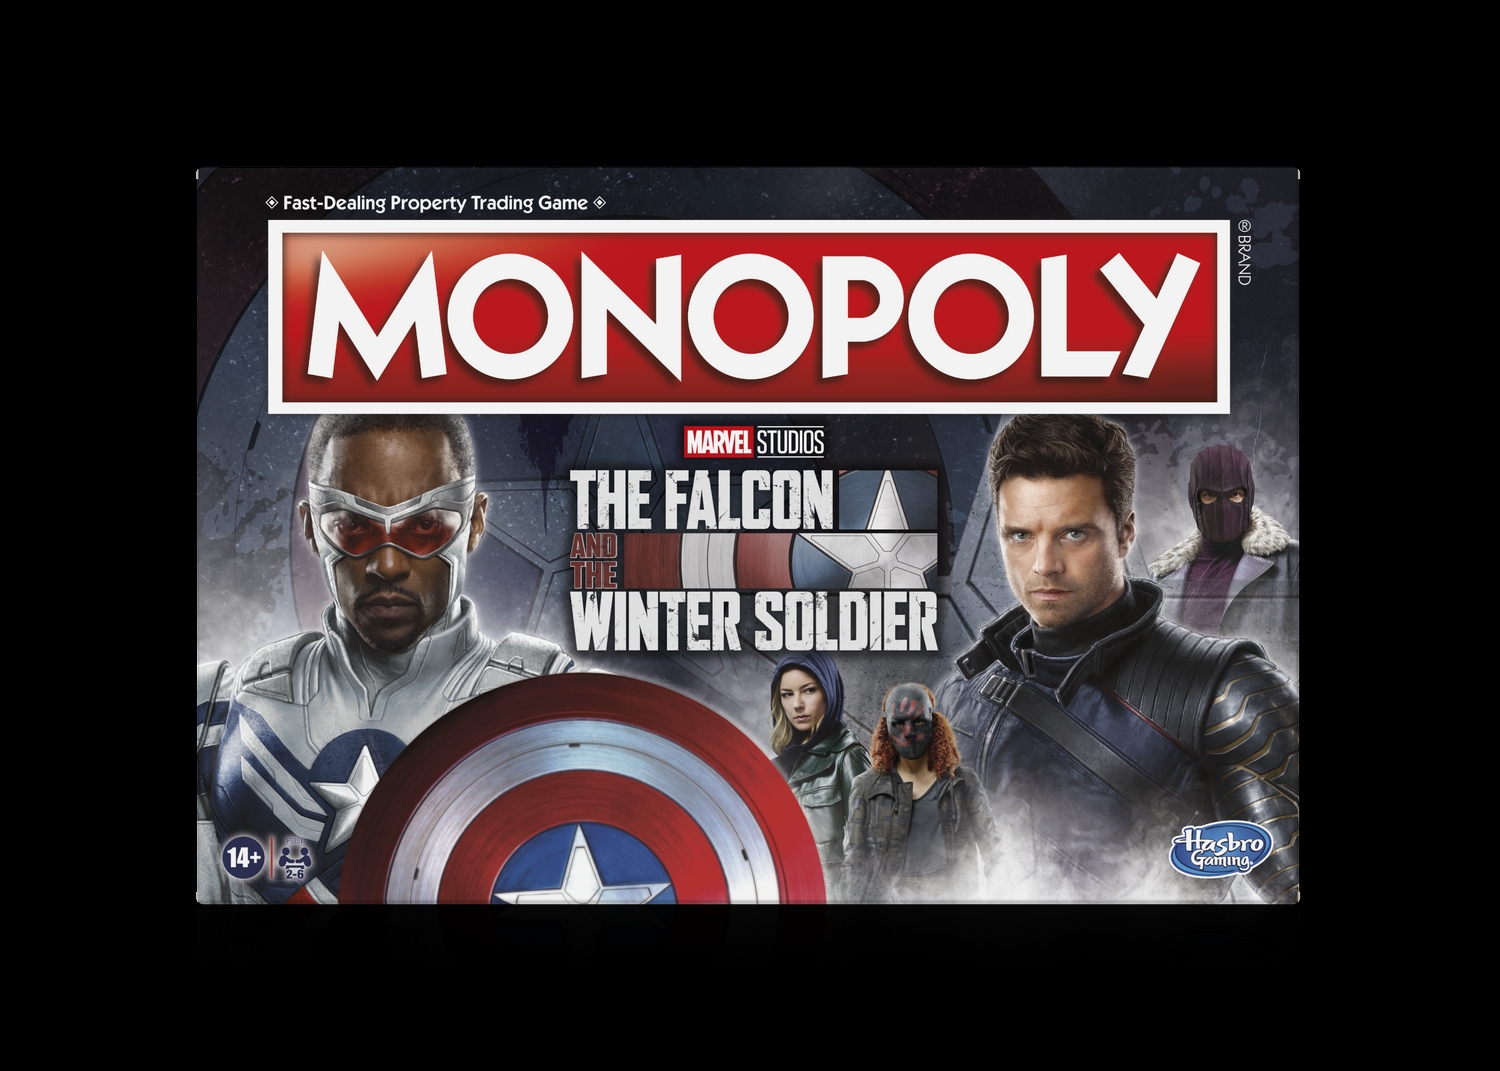 MONOPOLY MARVEL STUDIOS’ THE FALCON AND THE WINTER SOLDIER EDITION.jpg